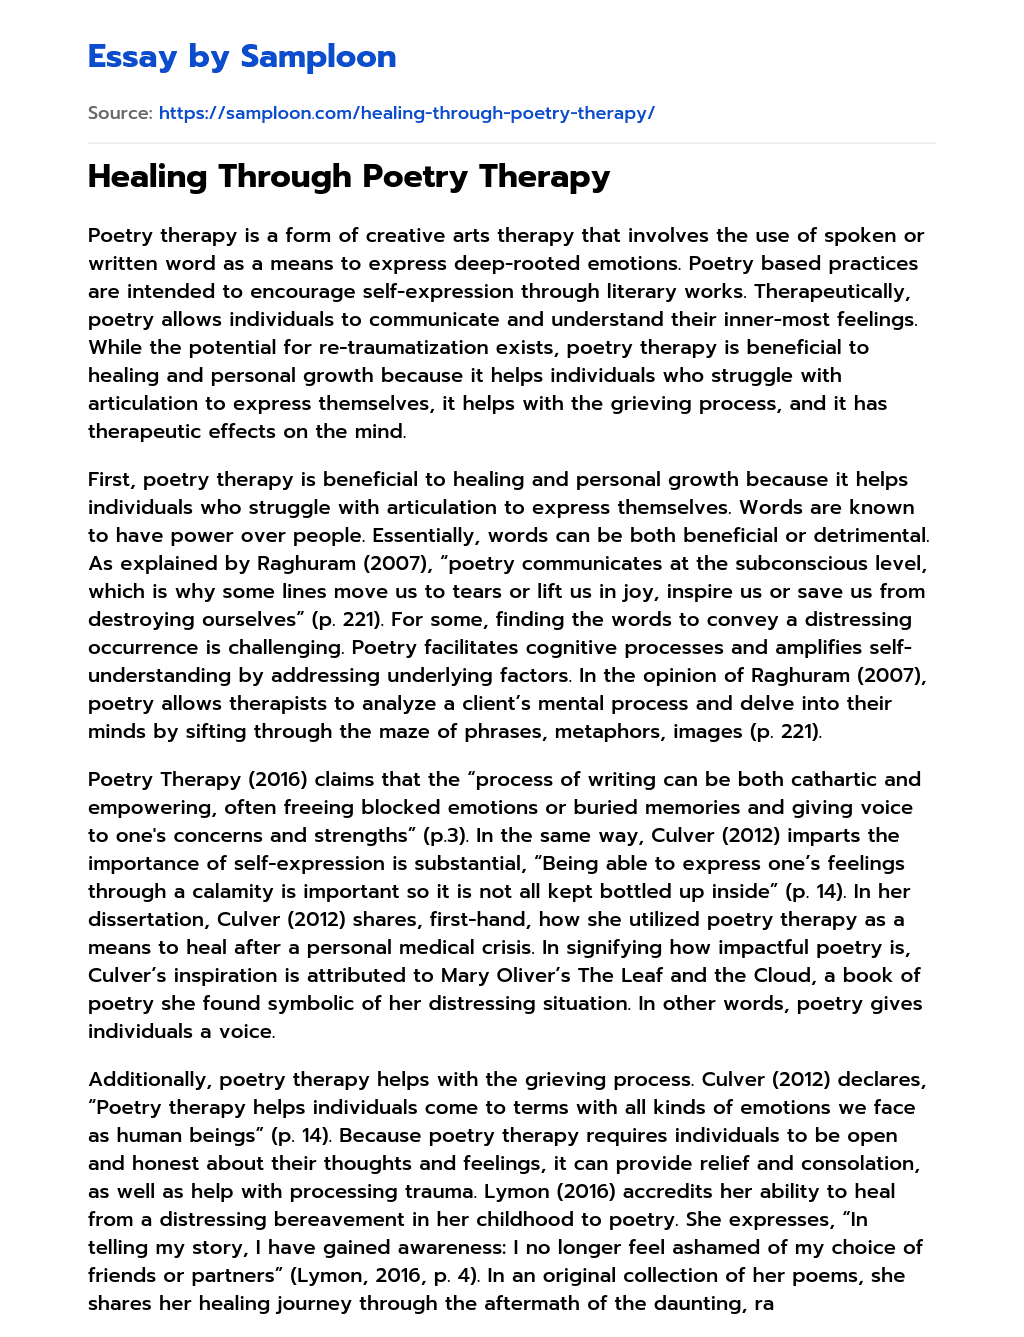 Healing Through Poetry Therapy essay